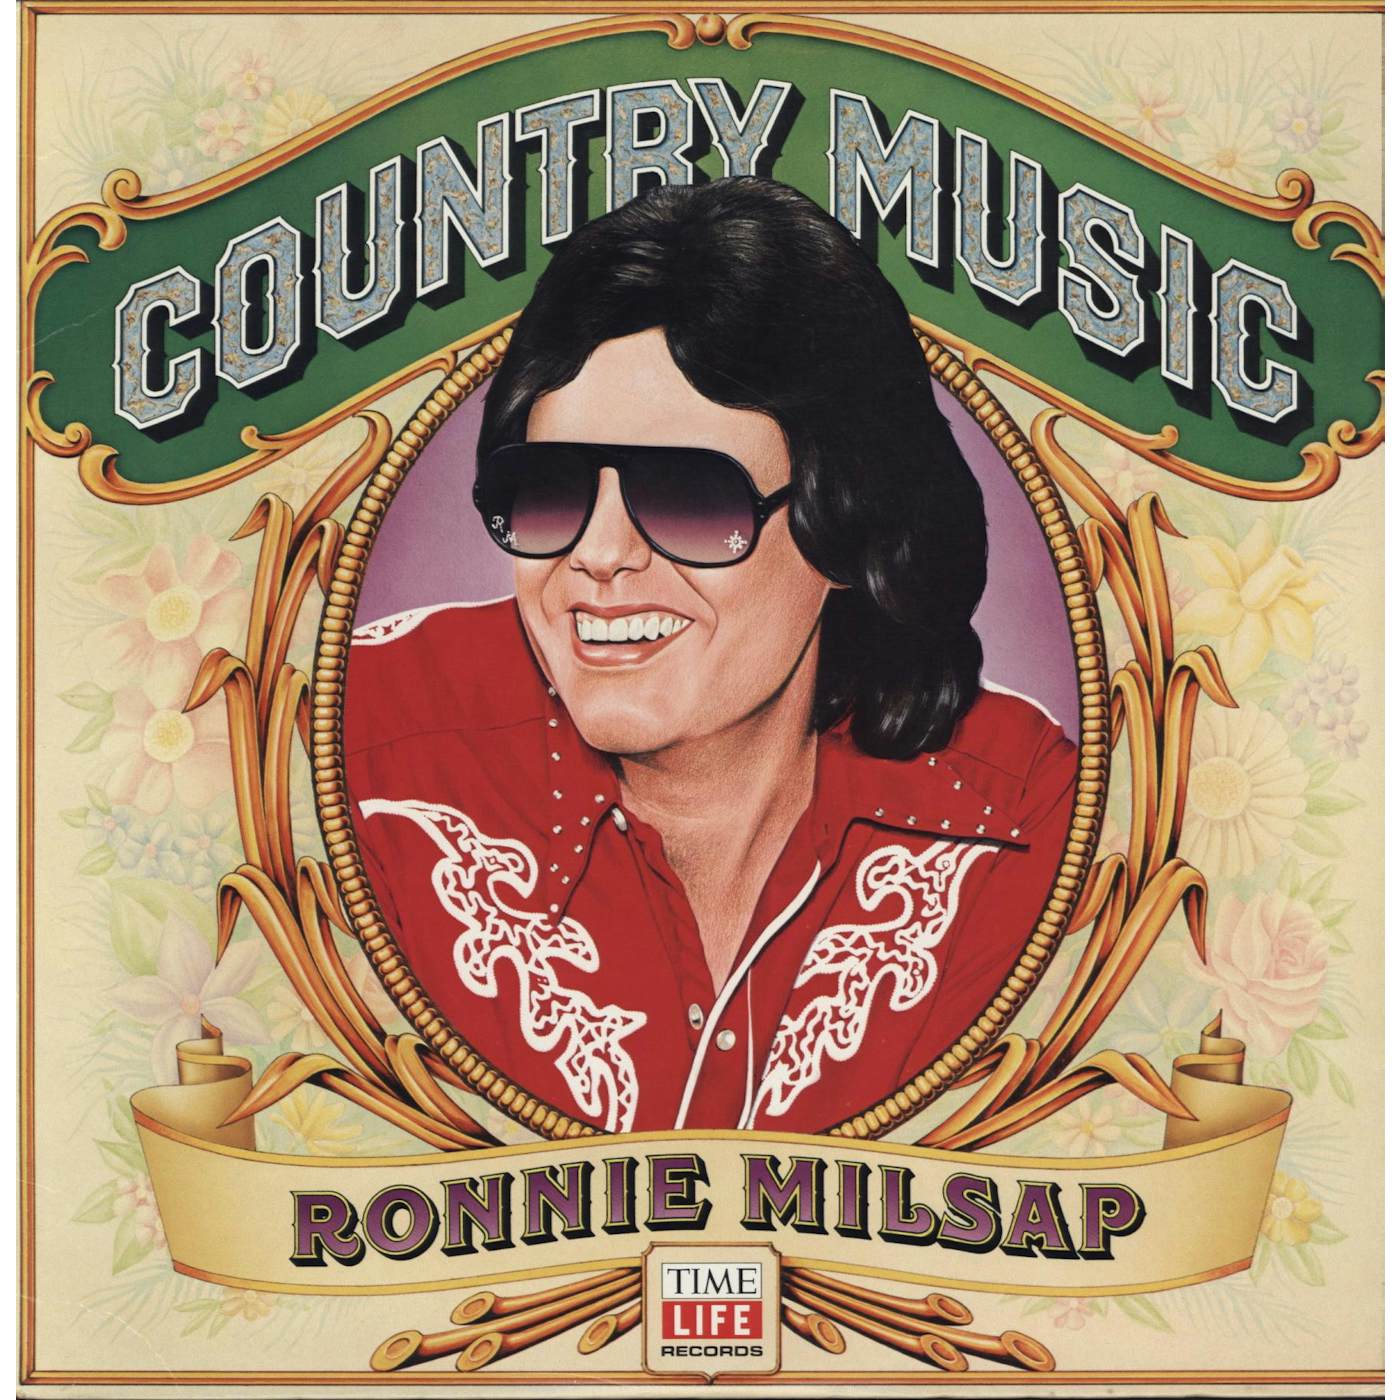 Ronnie Milsap COUNTRY MUSIC Vinyl Record